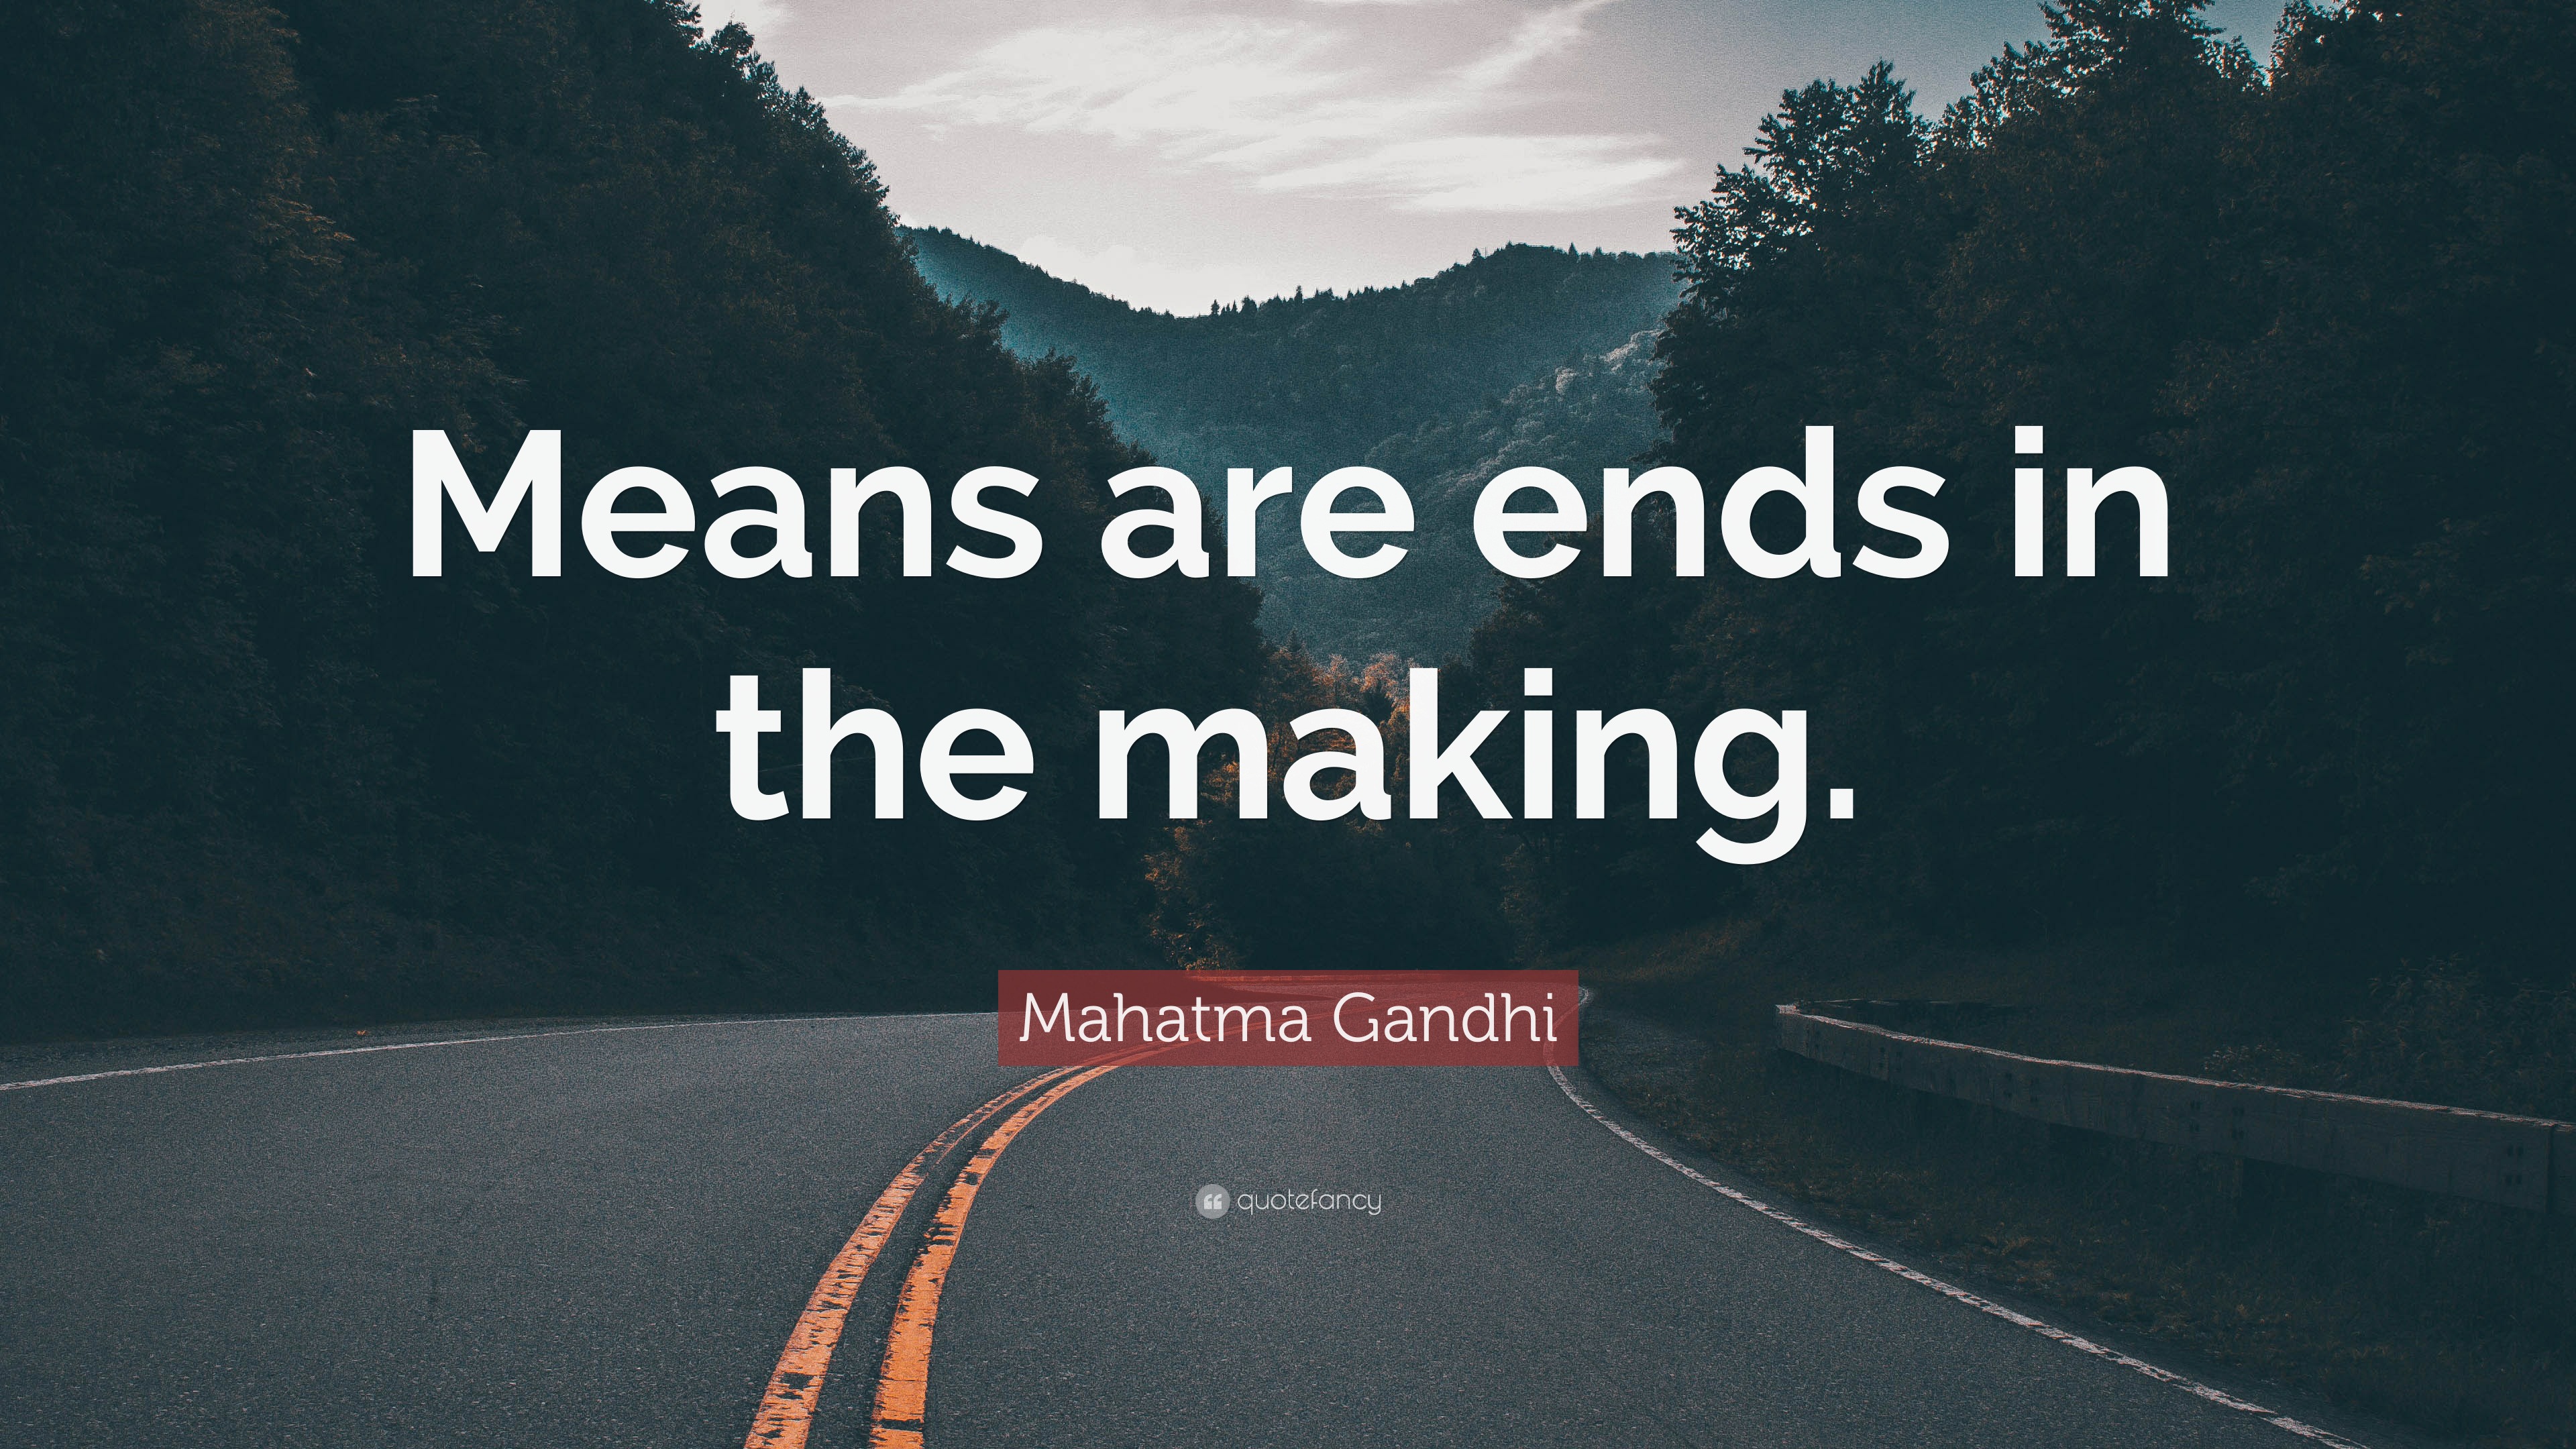 Mahatma Gandhi Quote: “Means are ends in the making.”